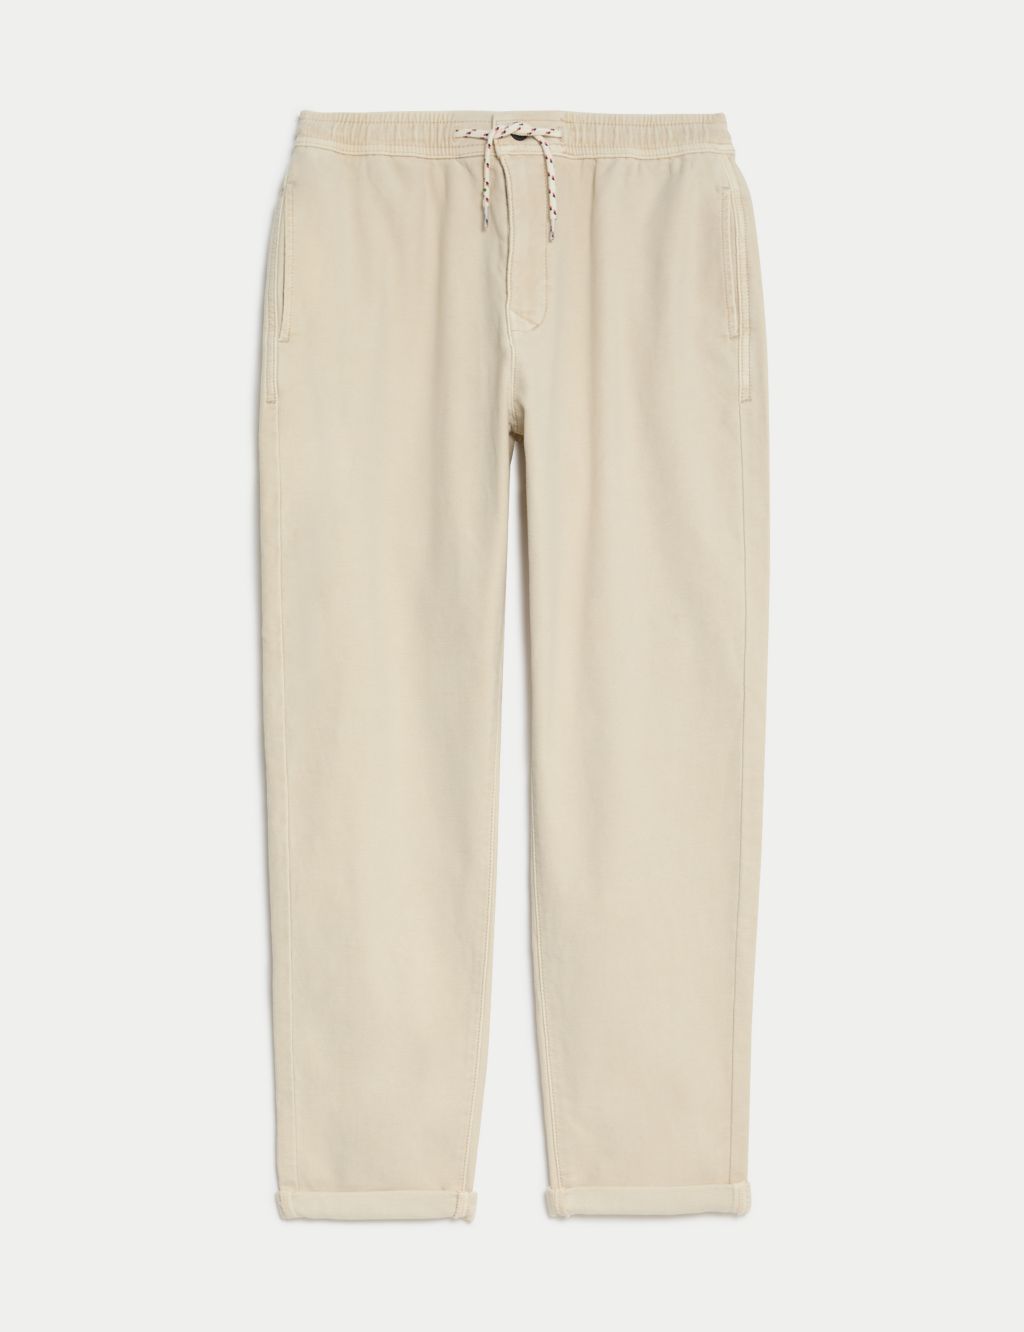 Relaxed Cotton Rich Skater Chinos (6-16 Yrs) image 2